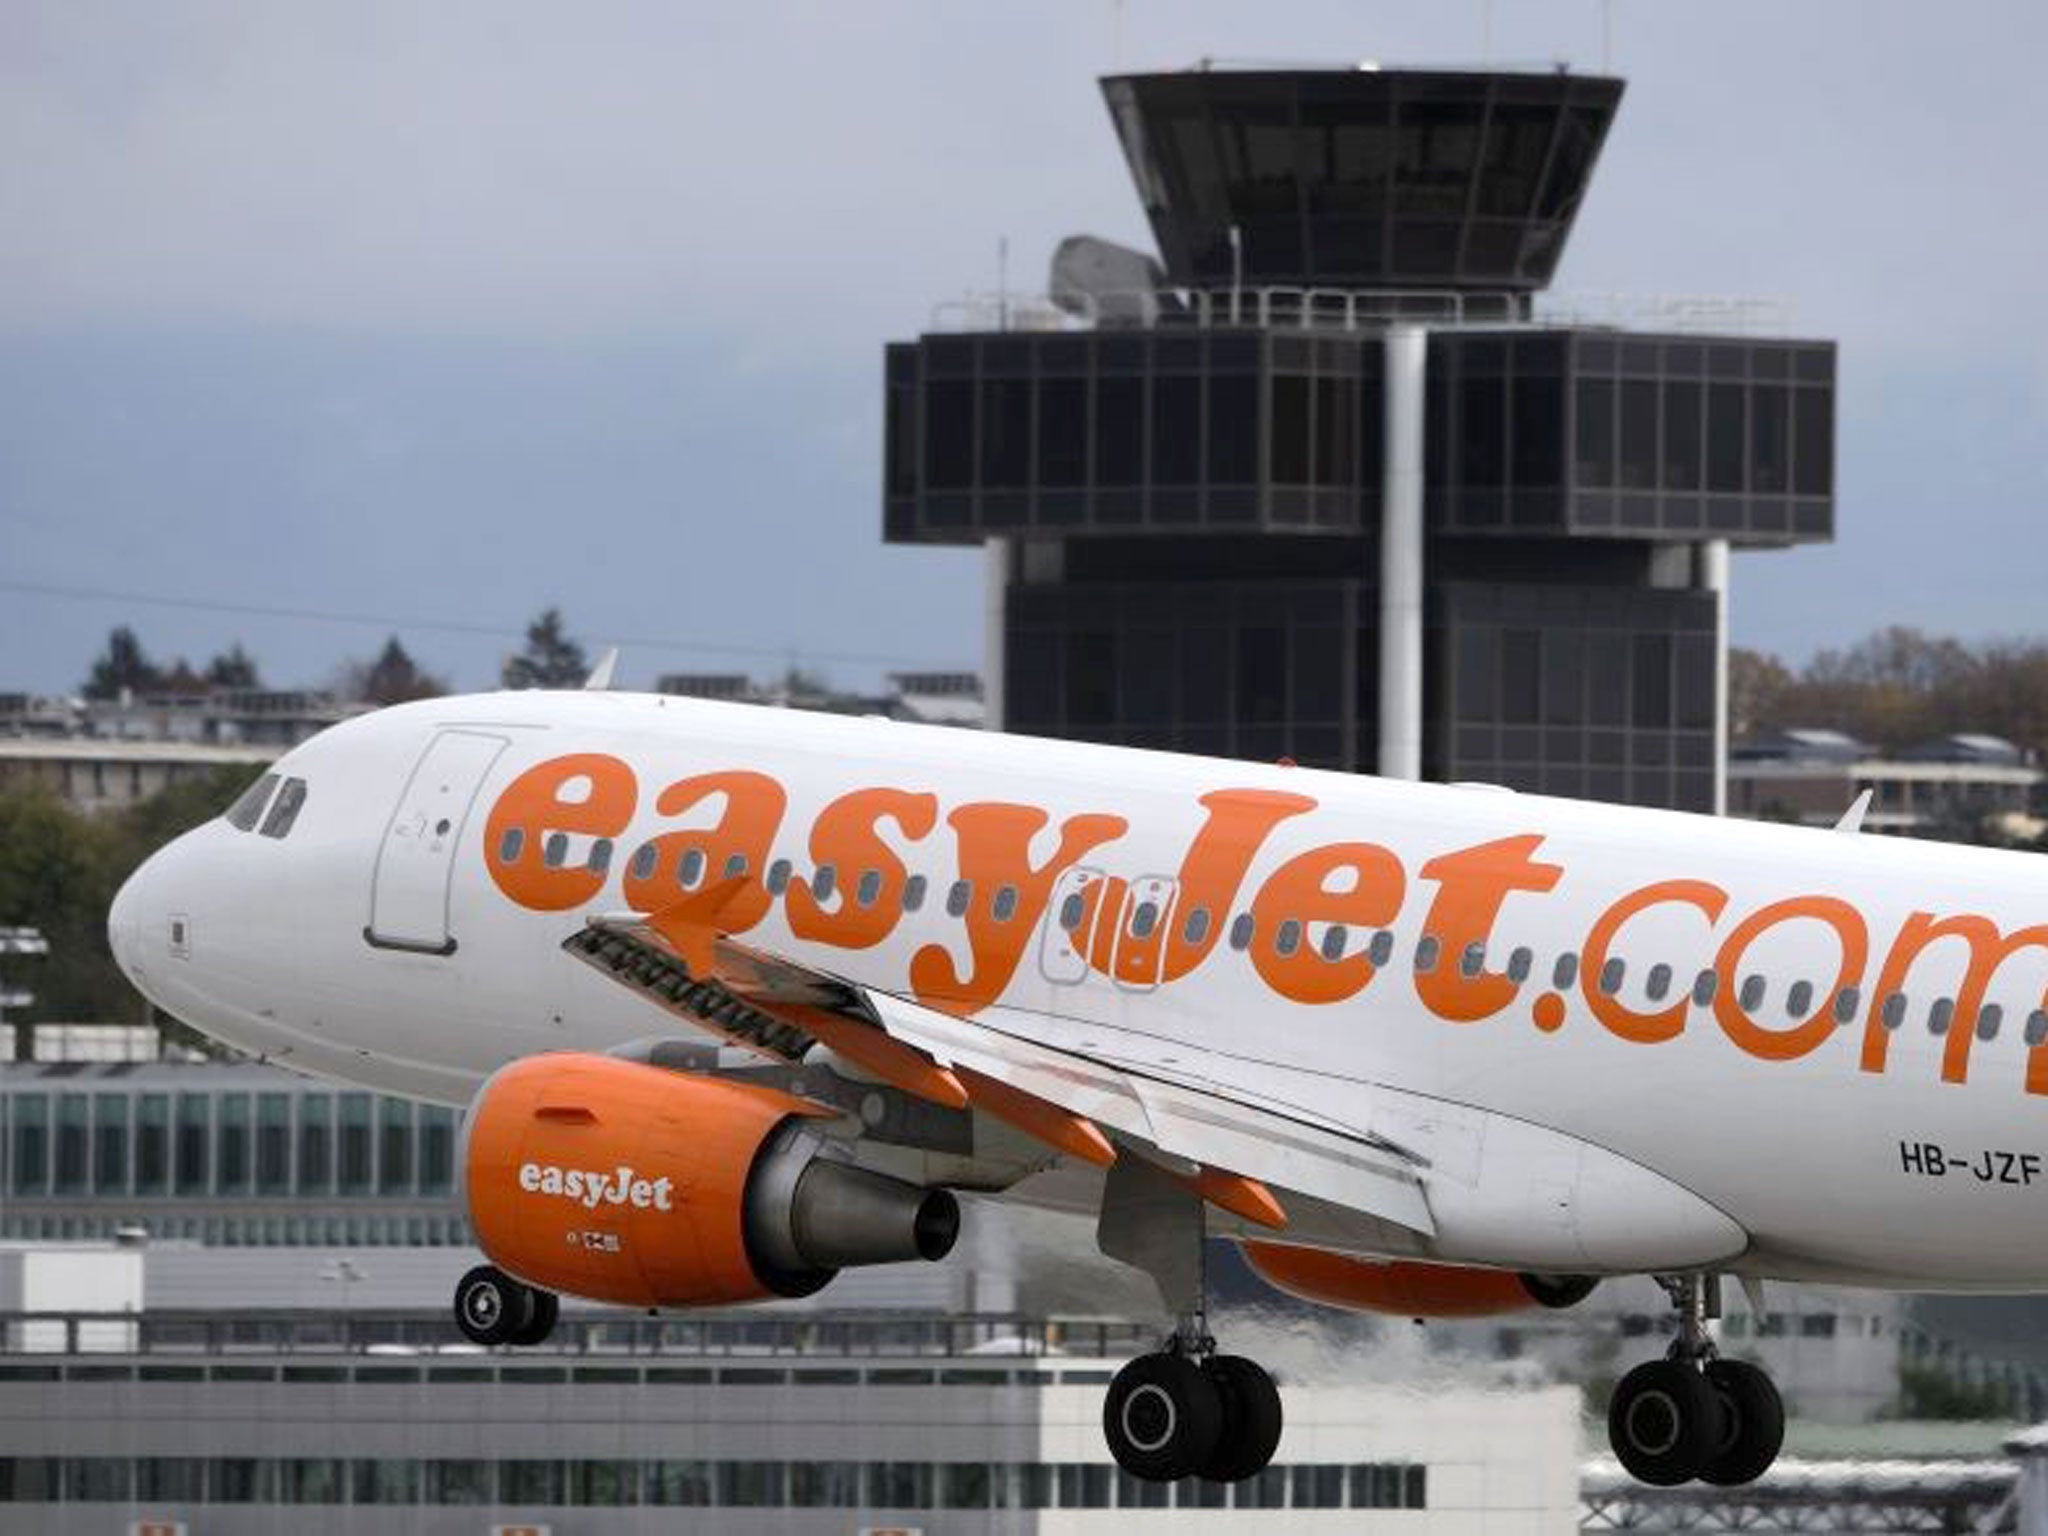 easyJet has no maximum weight limit for cabin baggage, at least